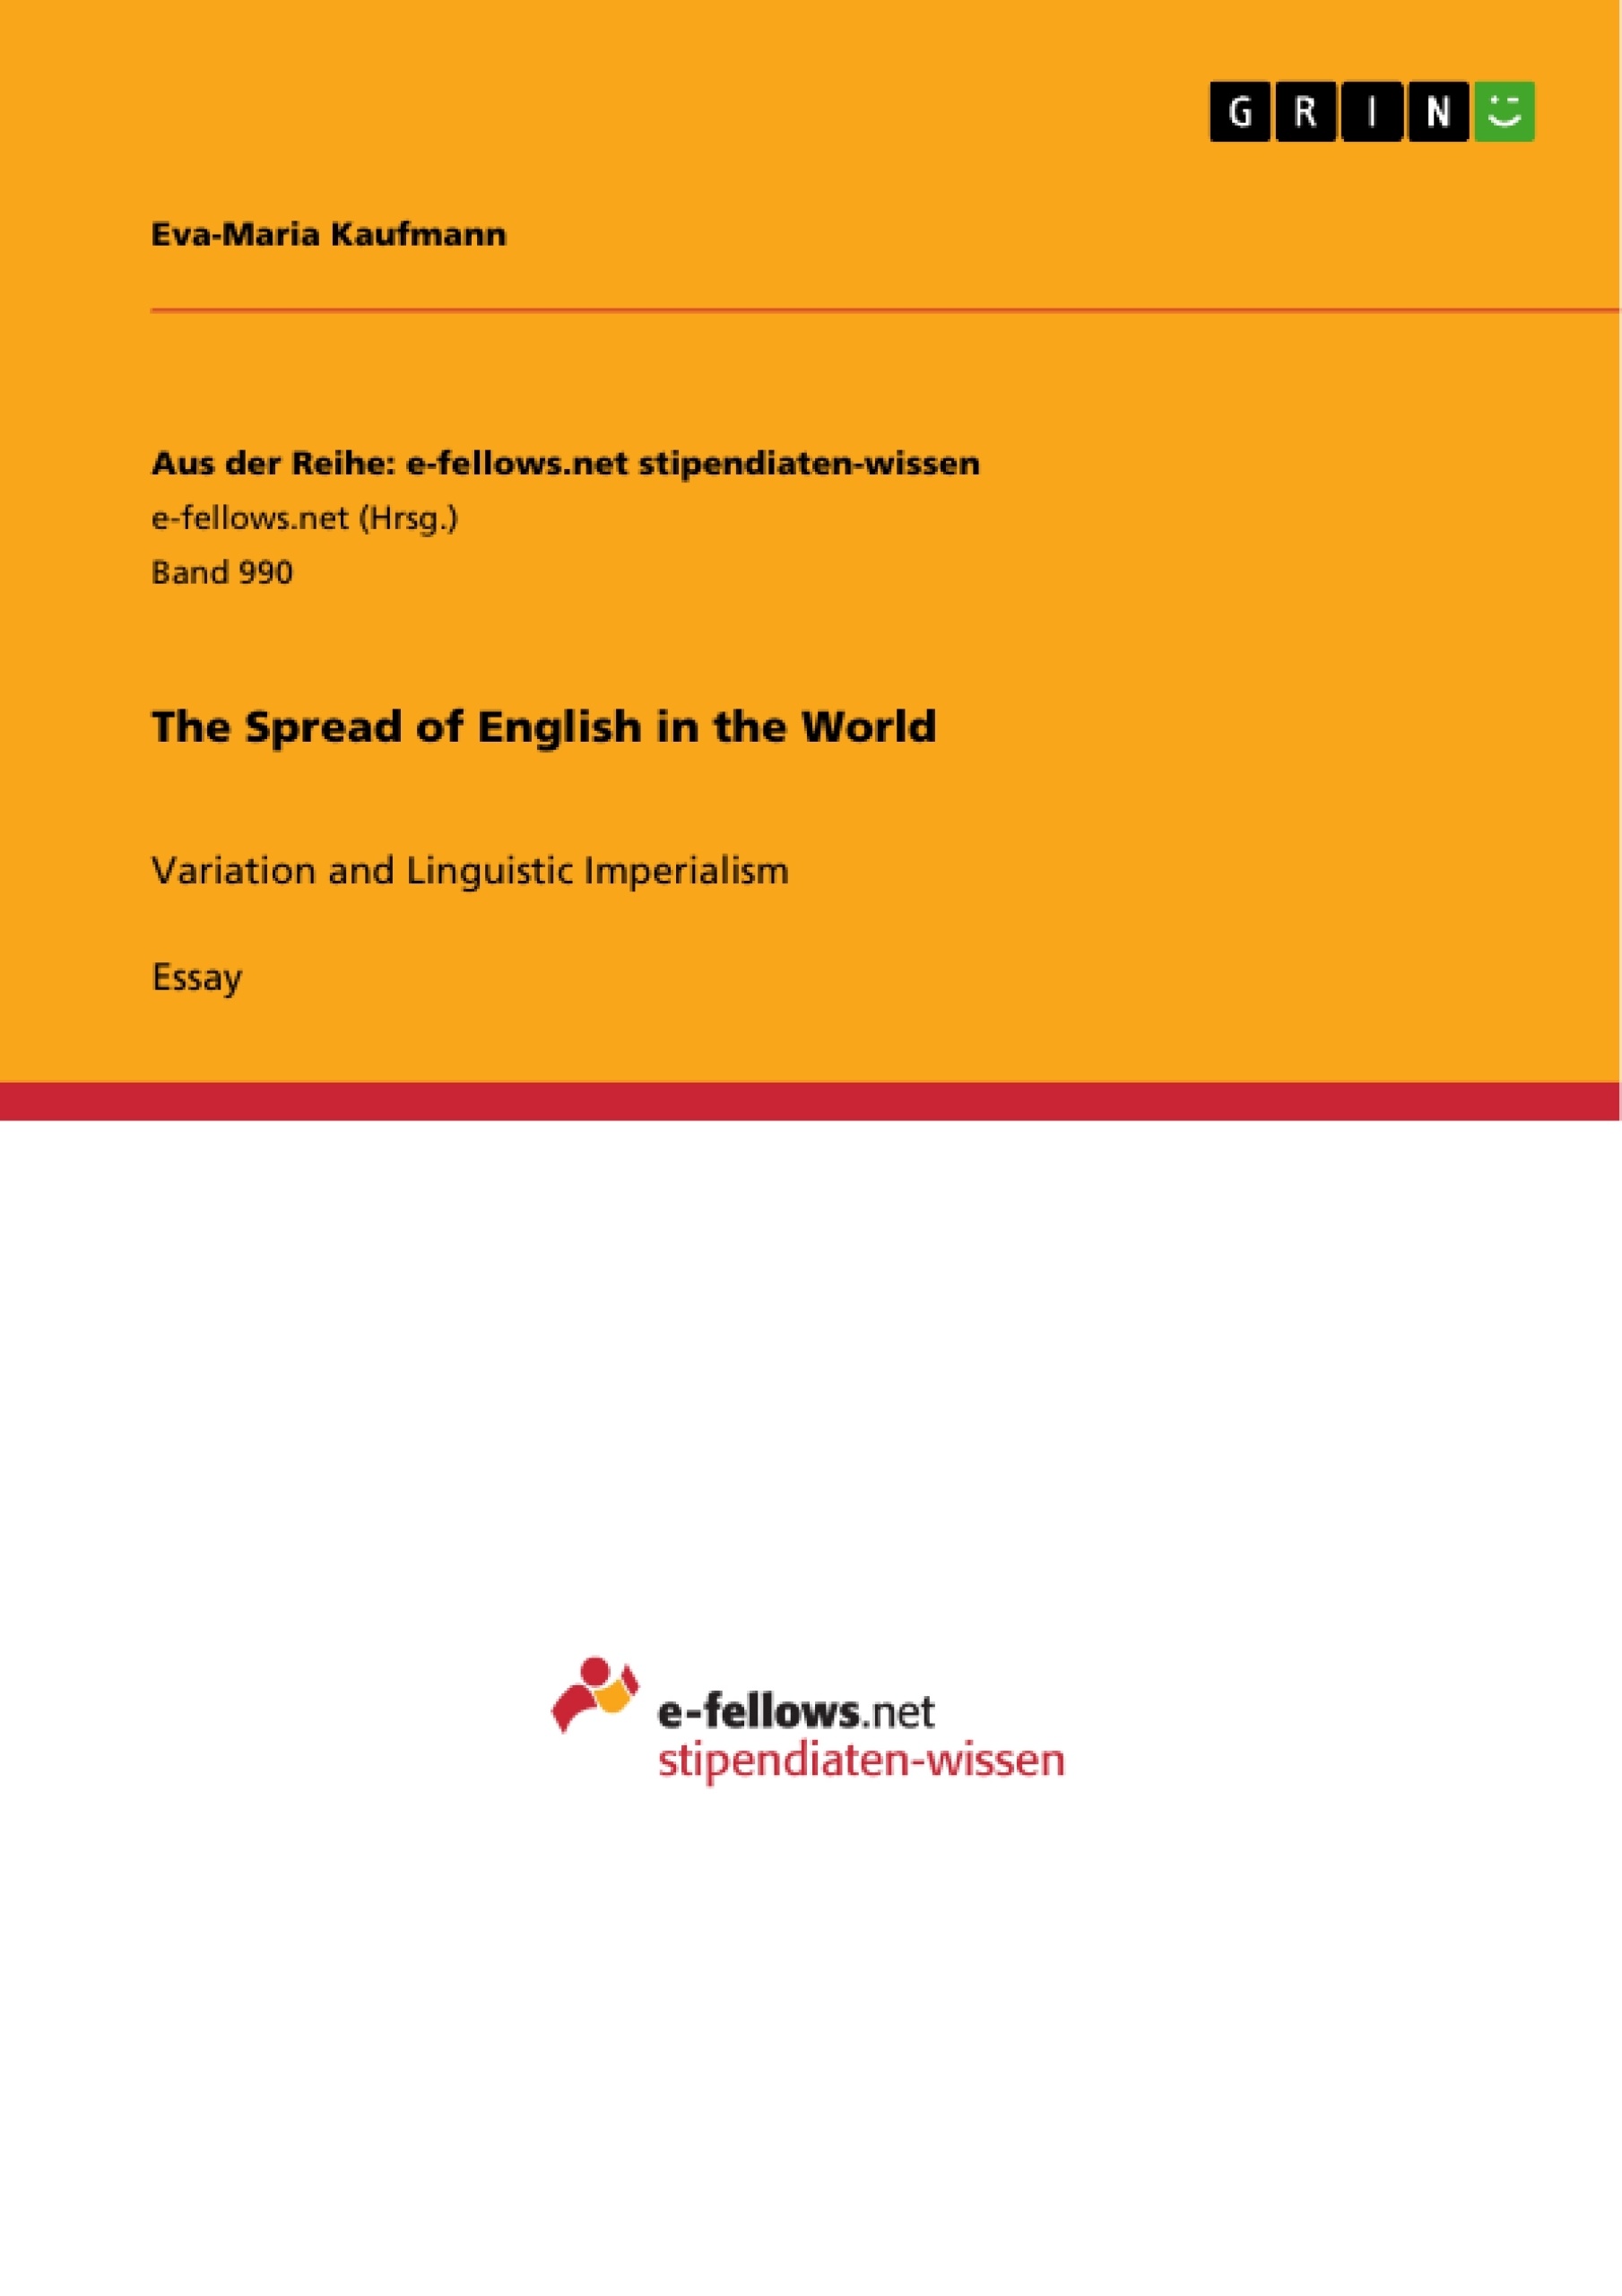 Title: The Spread of English in the World